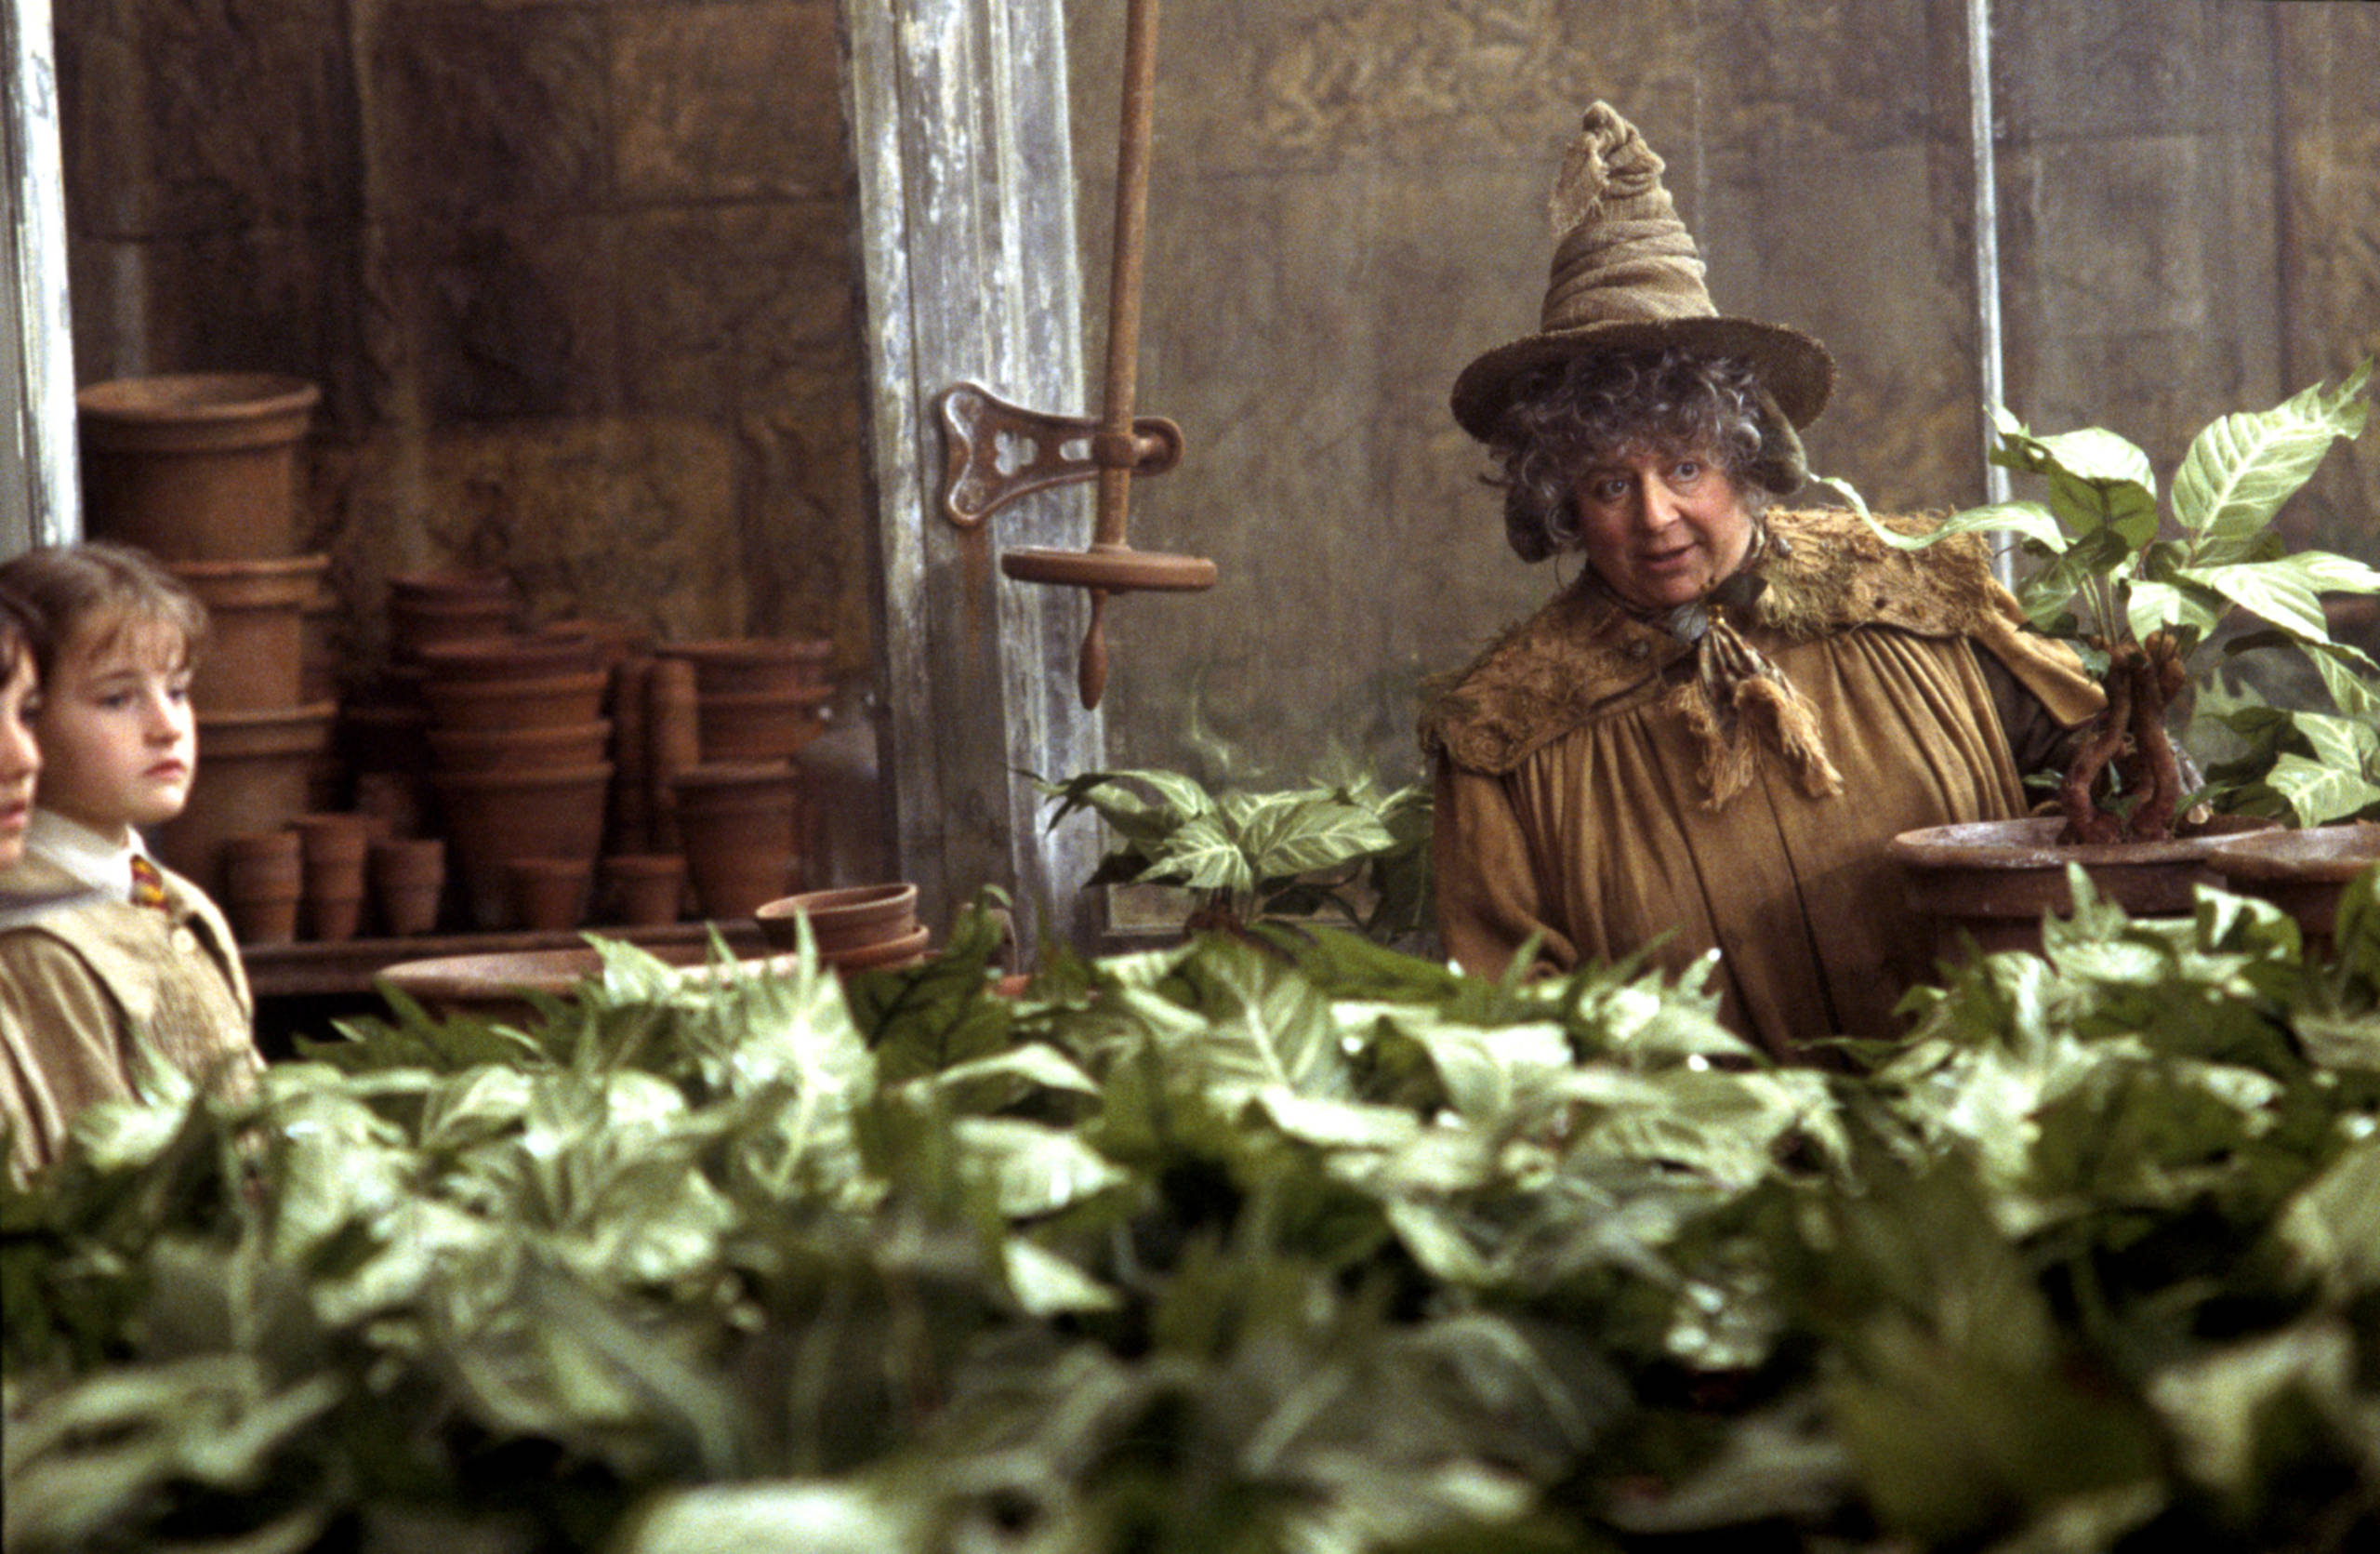 Pomona Sprout in her greenhouse from the Chamber of Secrets